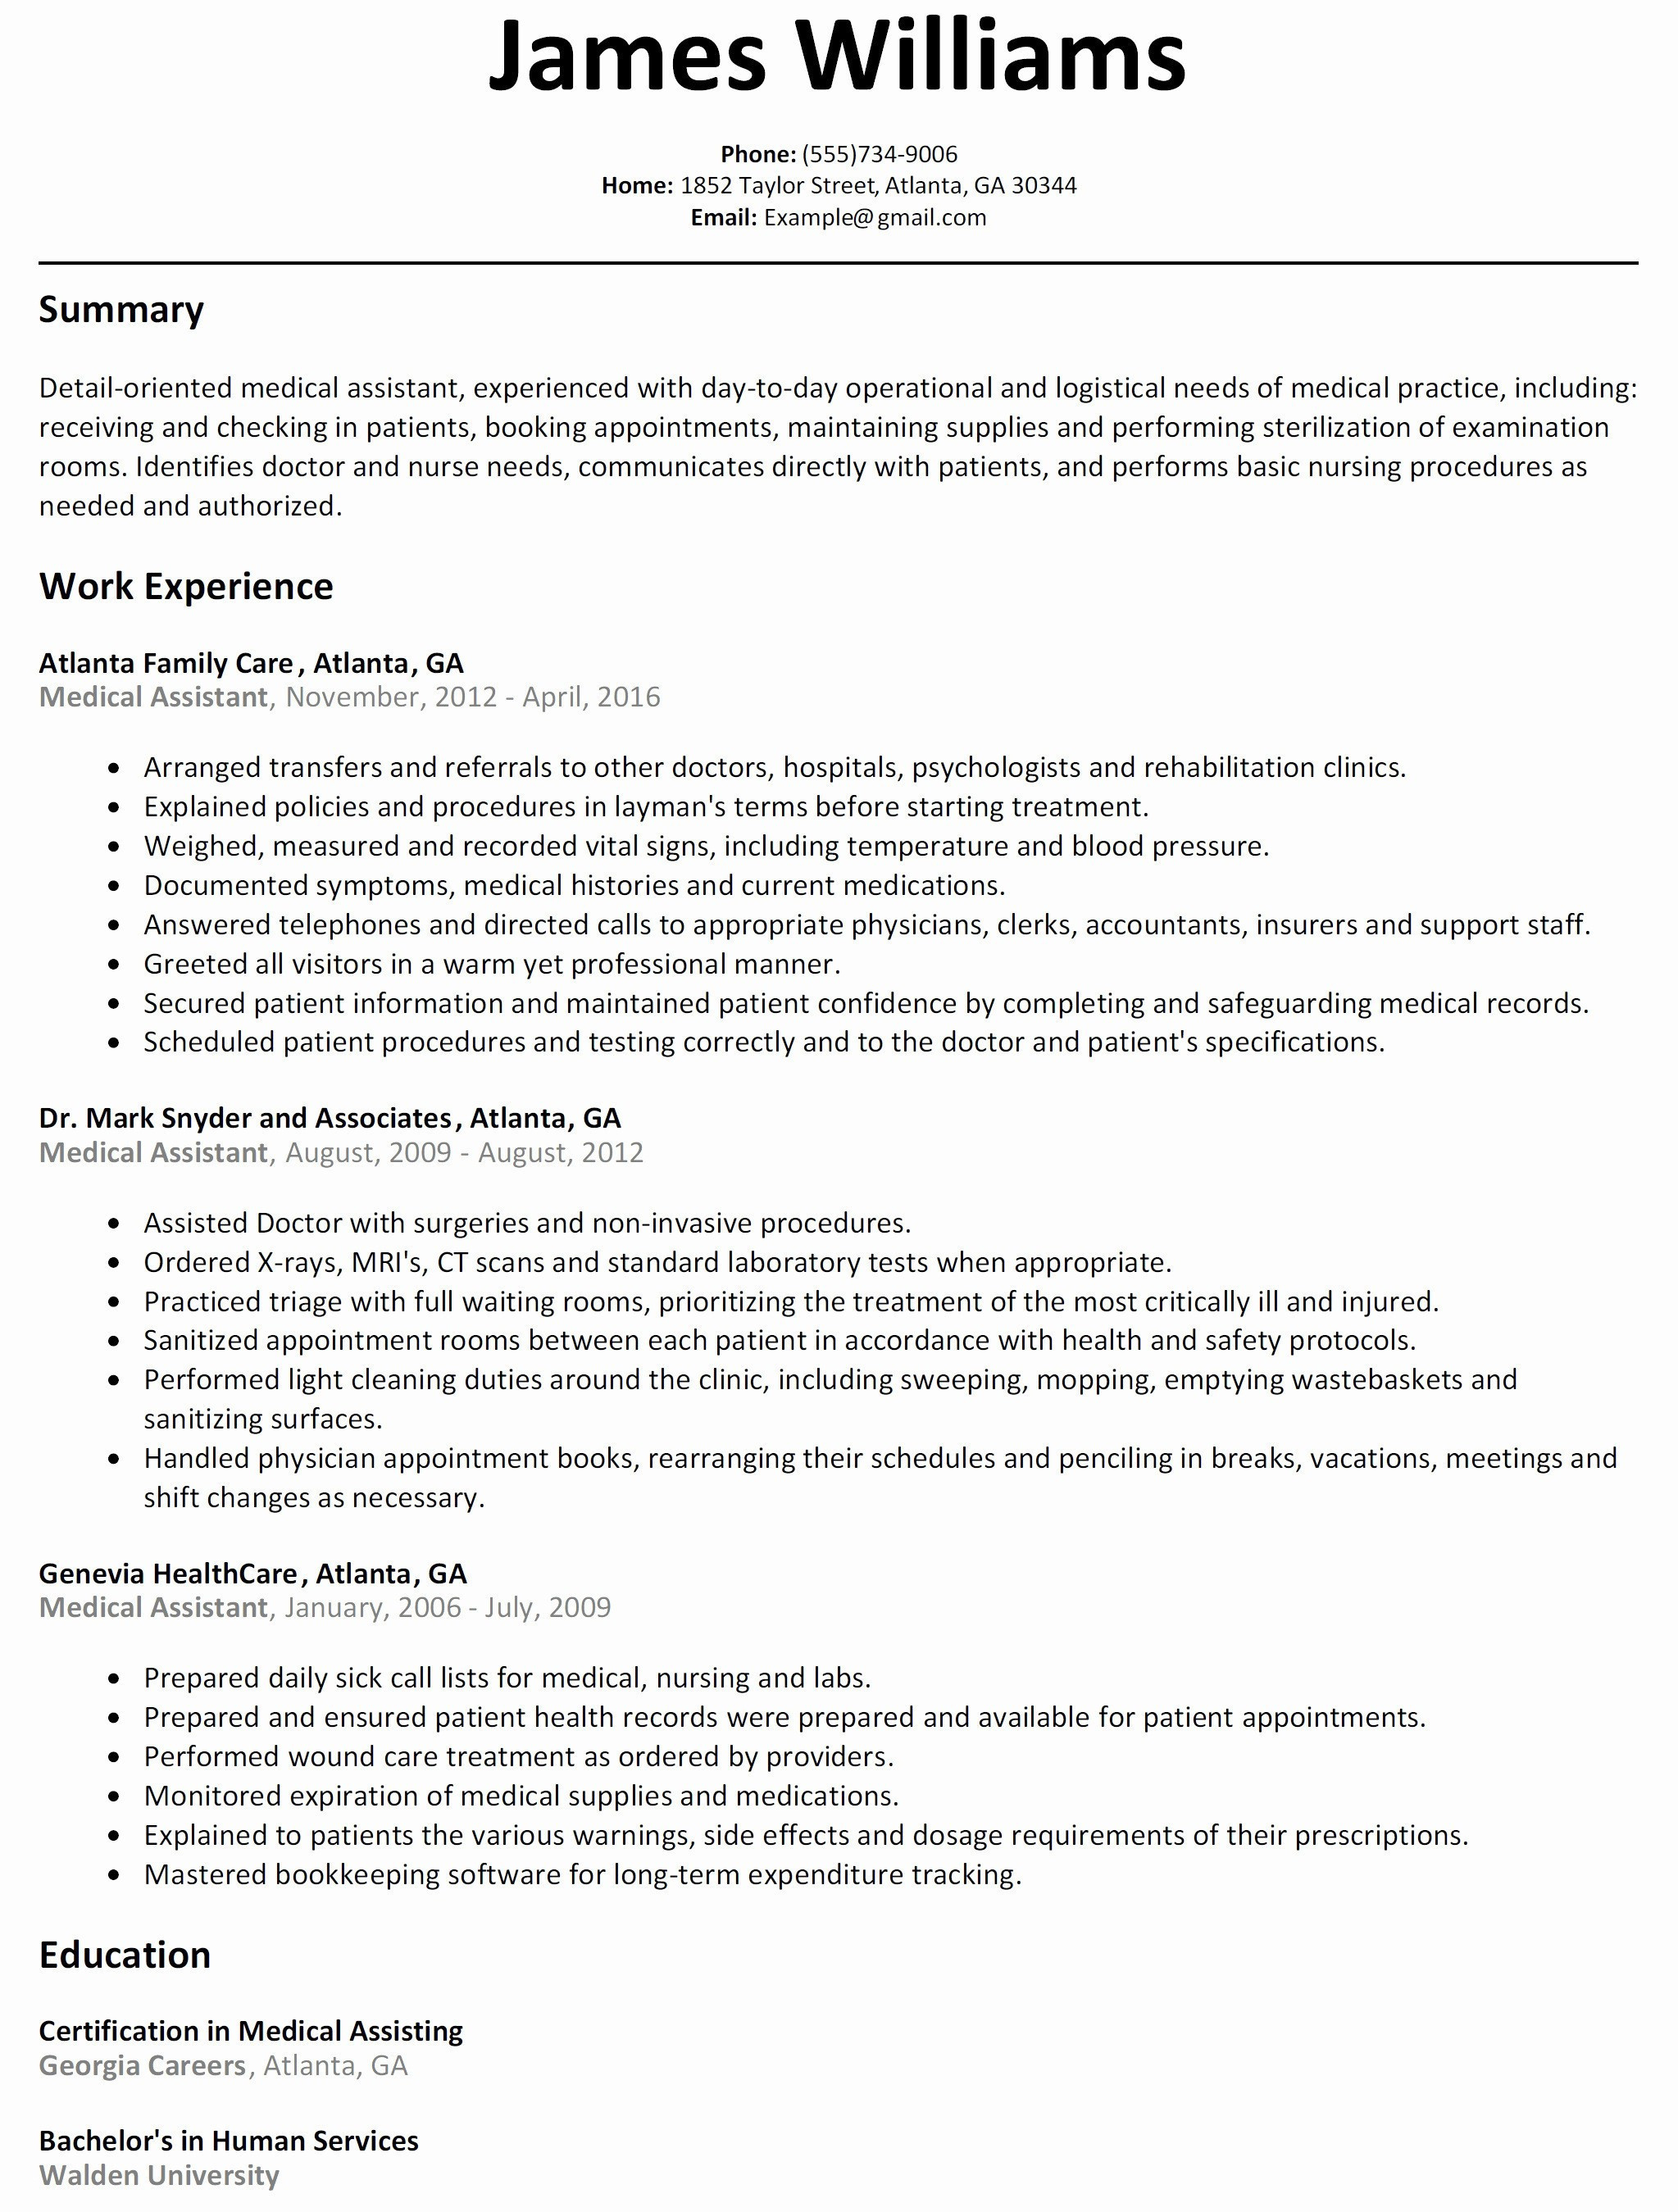 Example Of Resume 25 Sample Resume References Example 7k Free Example Resumes